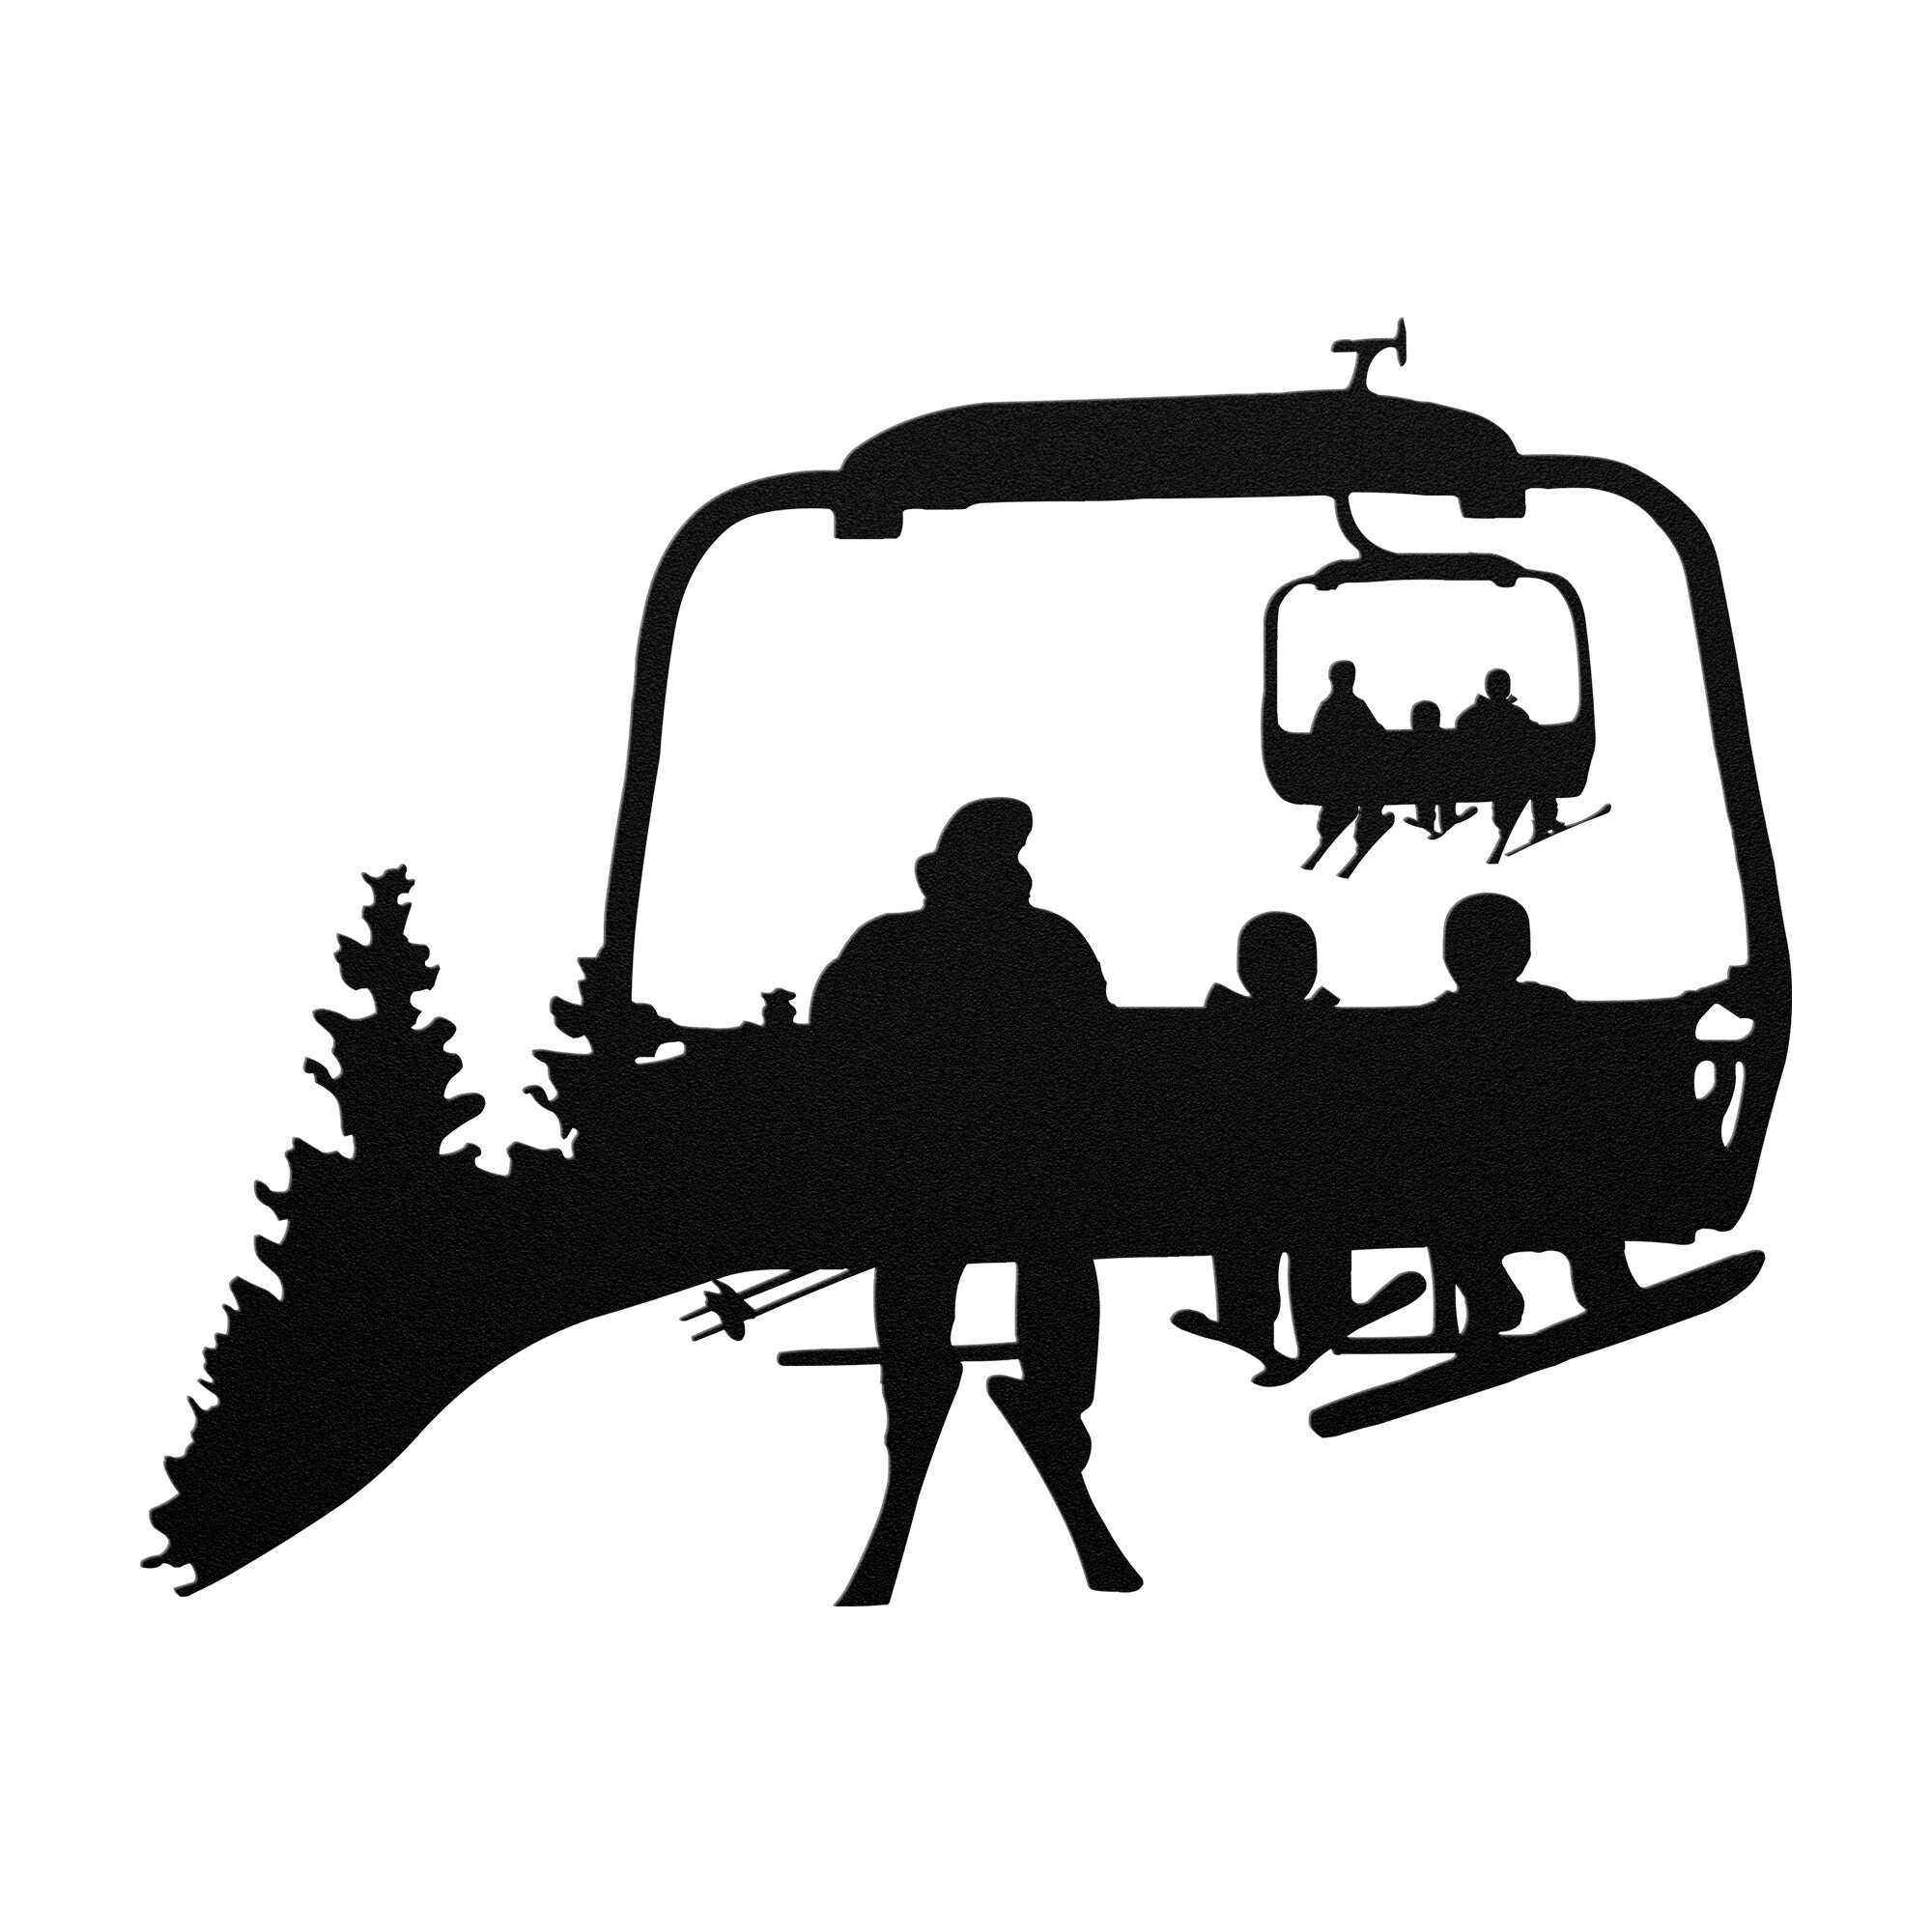 PERSONALIZED CHAIRLIFT SKI & SNOWBOARD FAMILY METAL WALL ART, 1 SKIING DAD, 1 SKIING CHILD, 1 SNOWBOARDING CHILD  (🇺🇸 MADE IN THE USA)